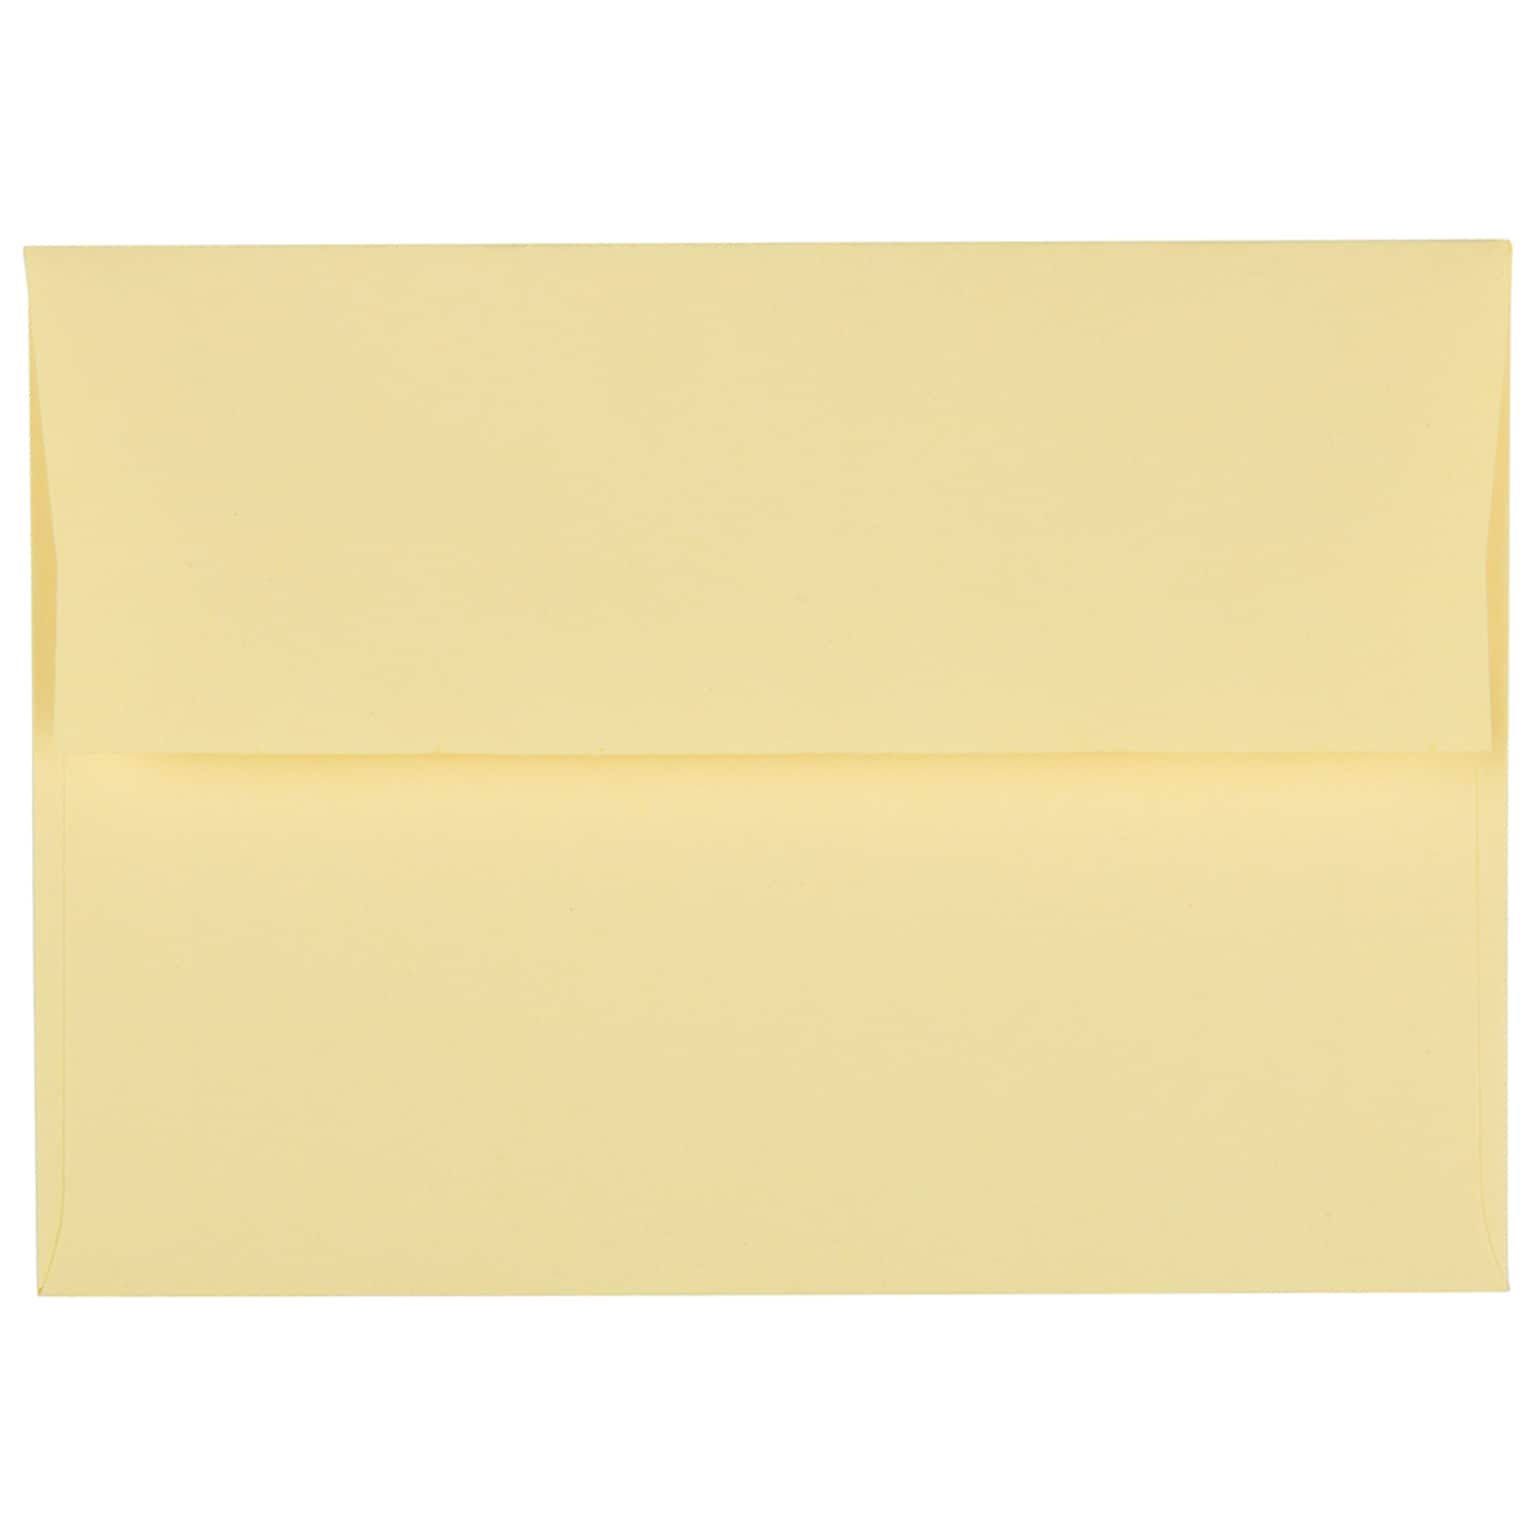 JAM Paper A9 Invitation Envelopes with Peel & Seal Closure, 5 3/4 x 8 3/4, Canary Yellow, 100/Pack (241137092D)